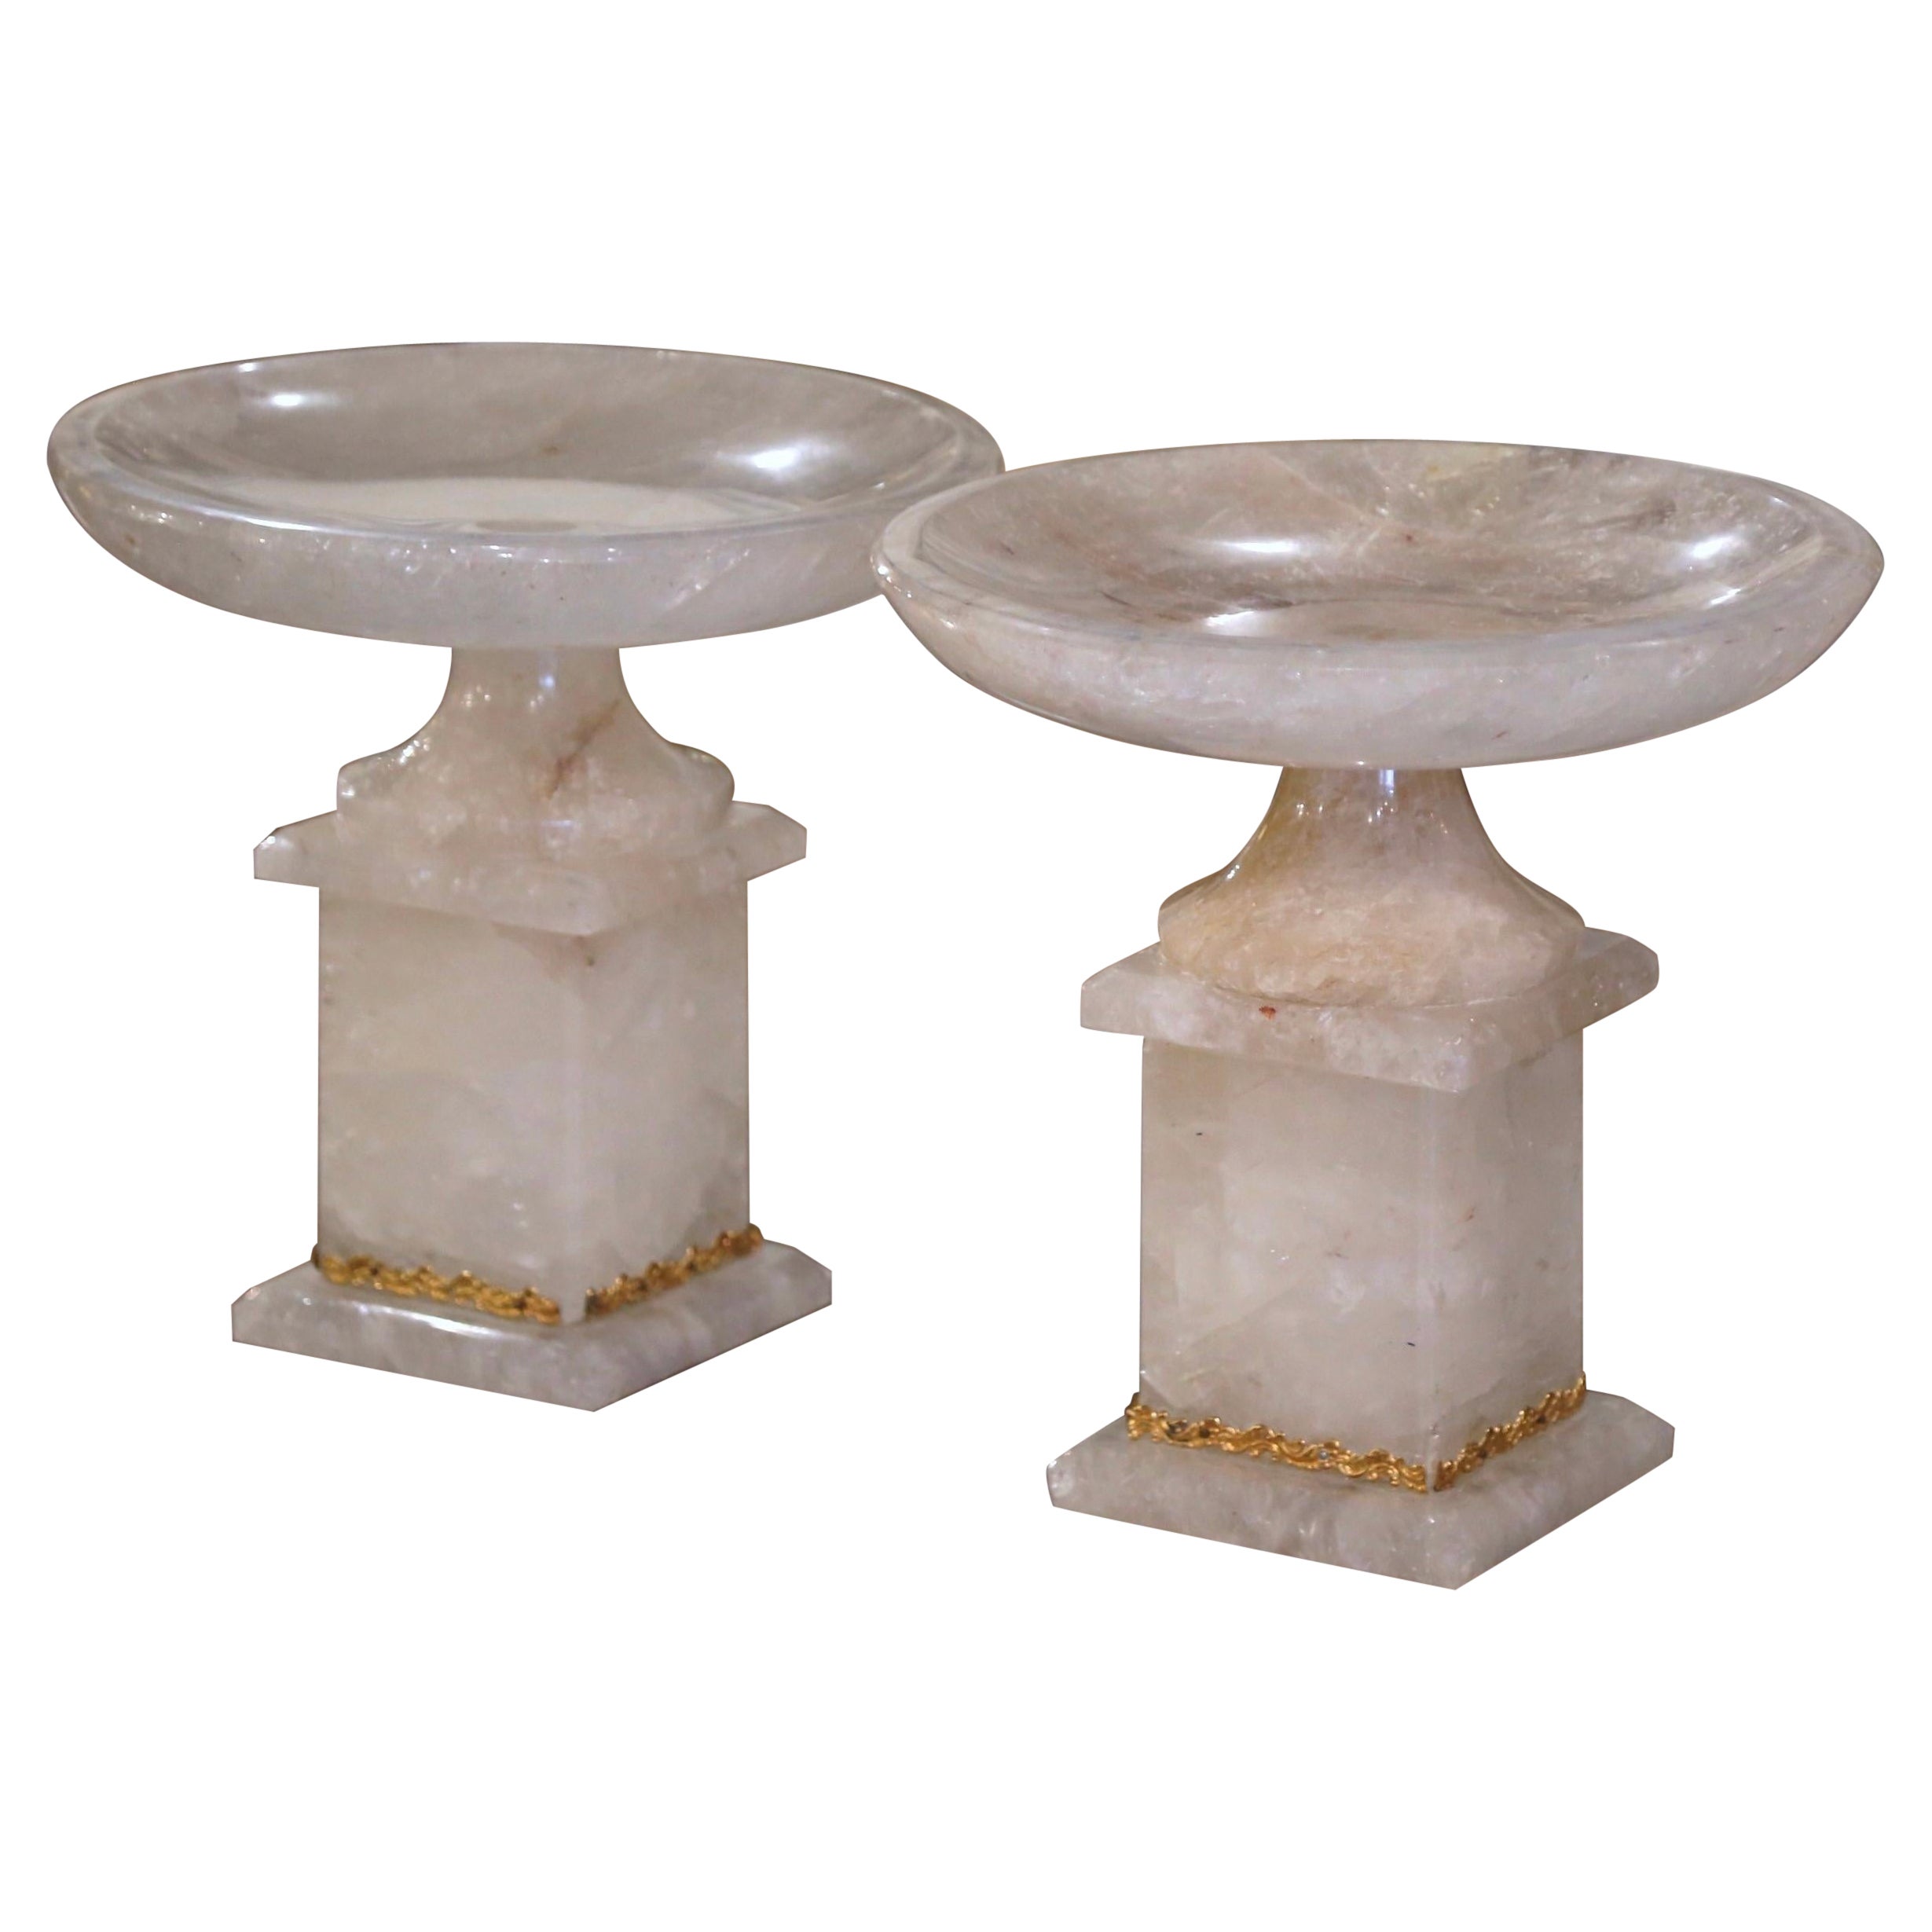  Pair of Brazilian Carved Rock Crystal Compote Centerpiece with Swivel Bowl For Sale